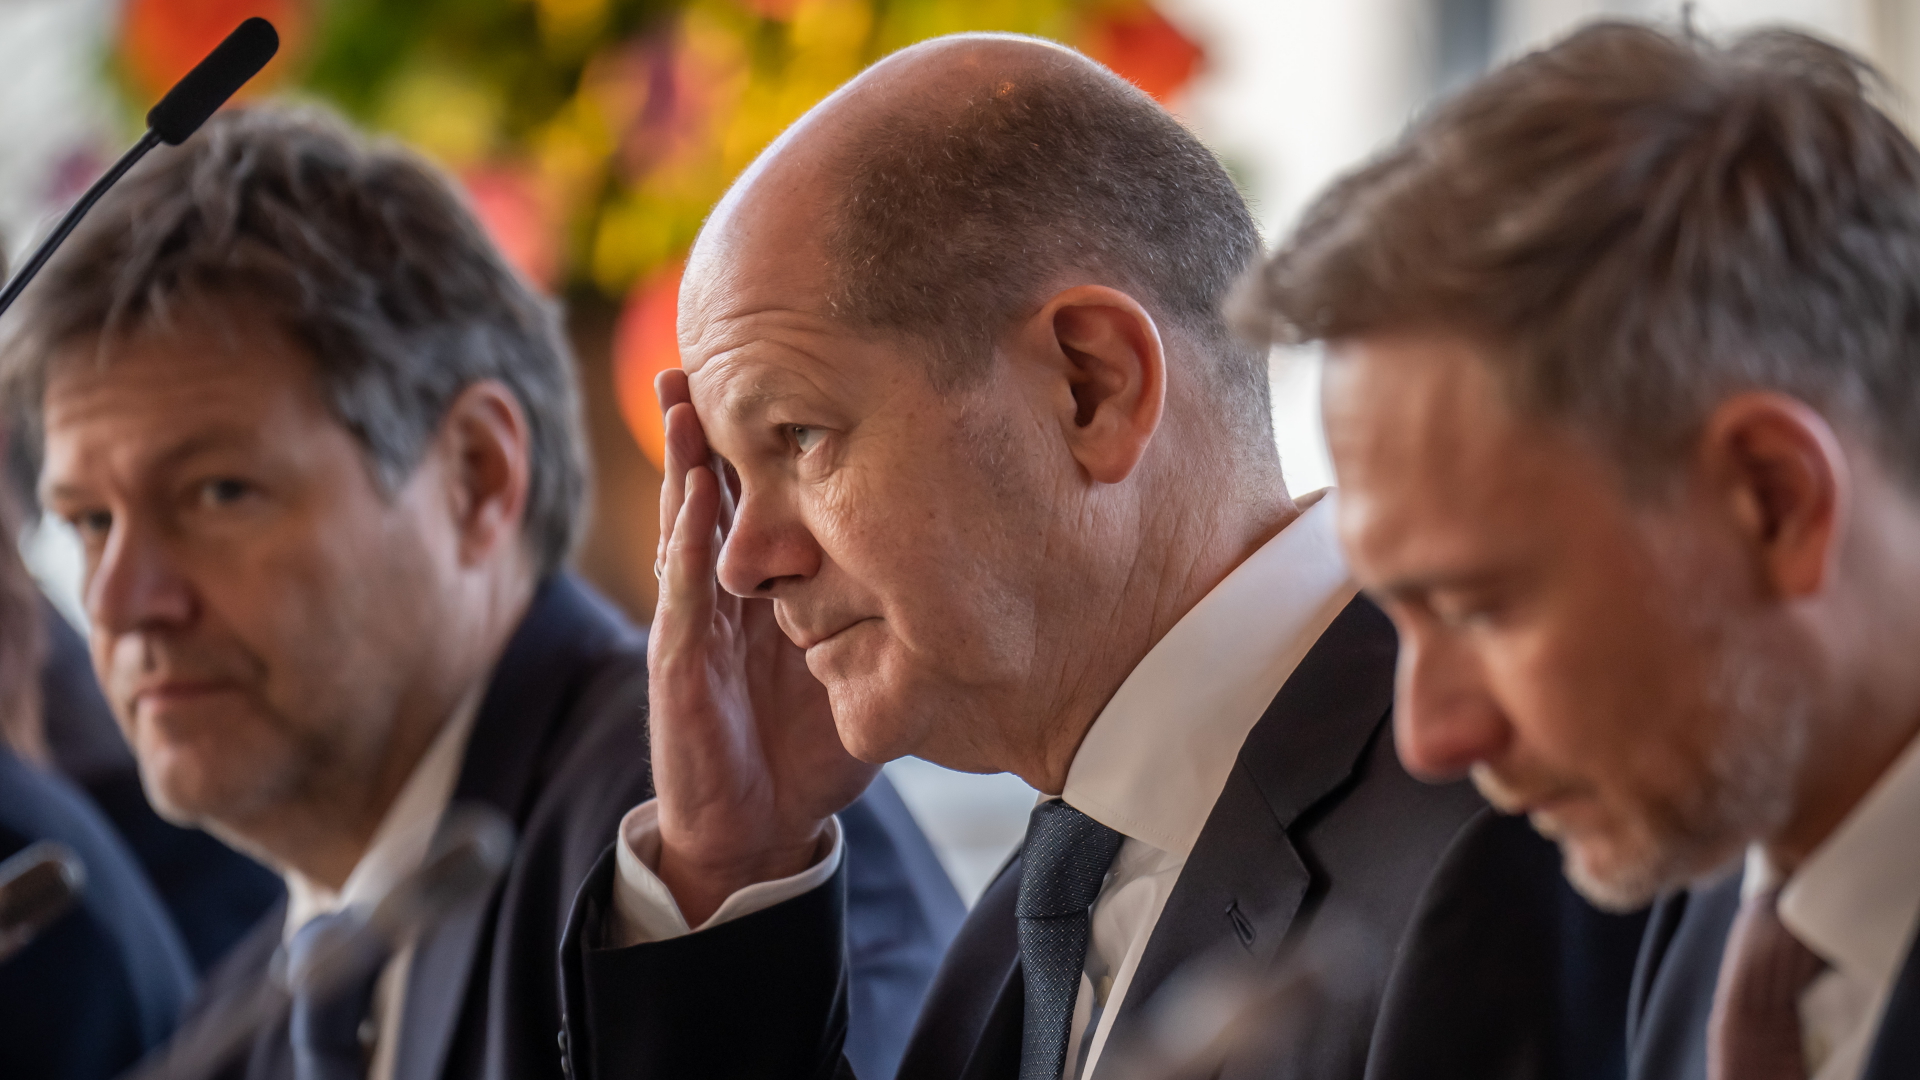 Robert Habeck, Olaf Scholz and Christian Lindner |  dpa